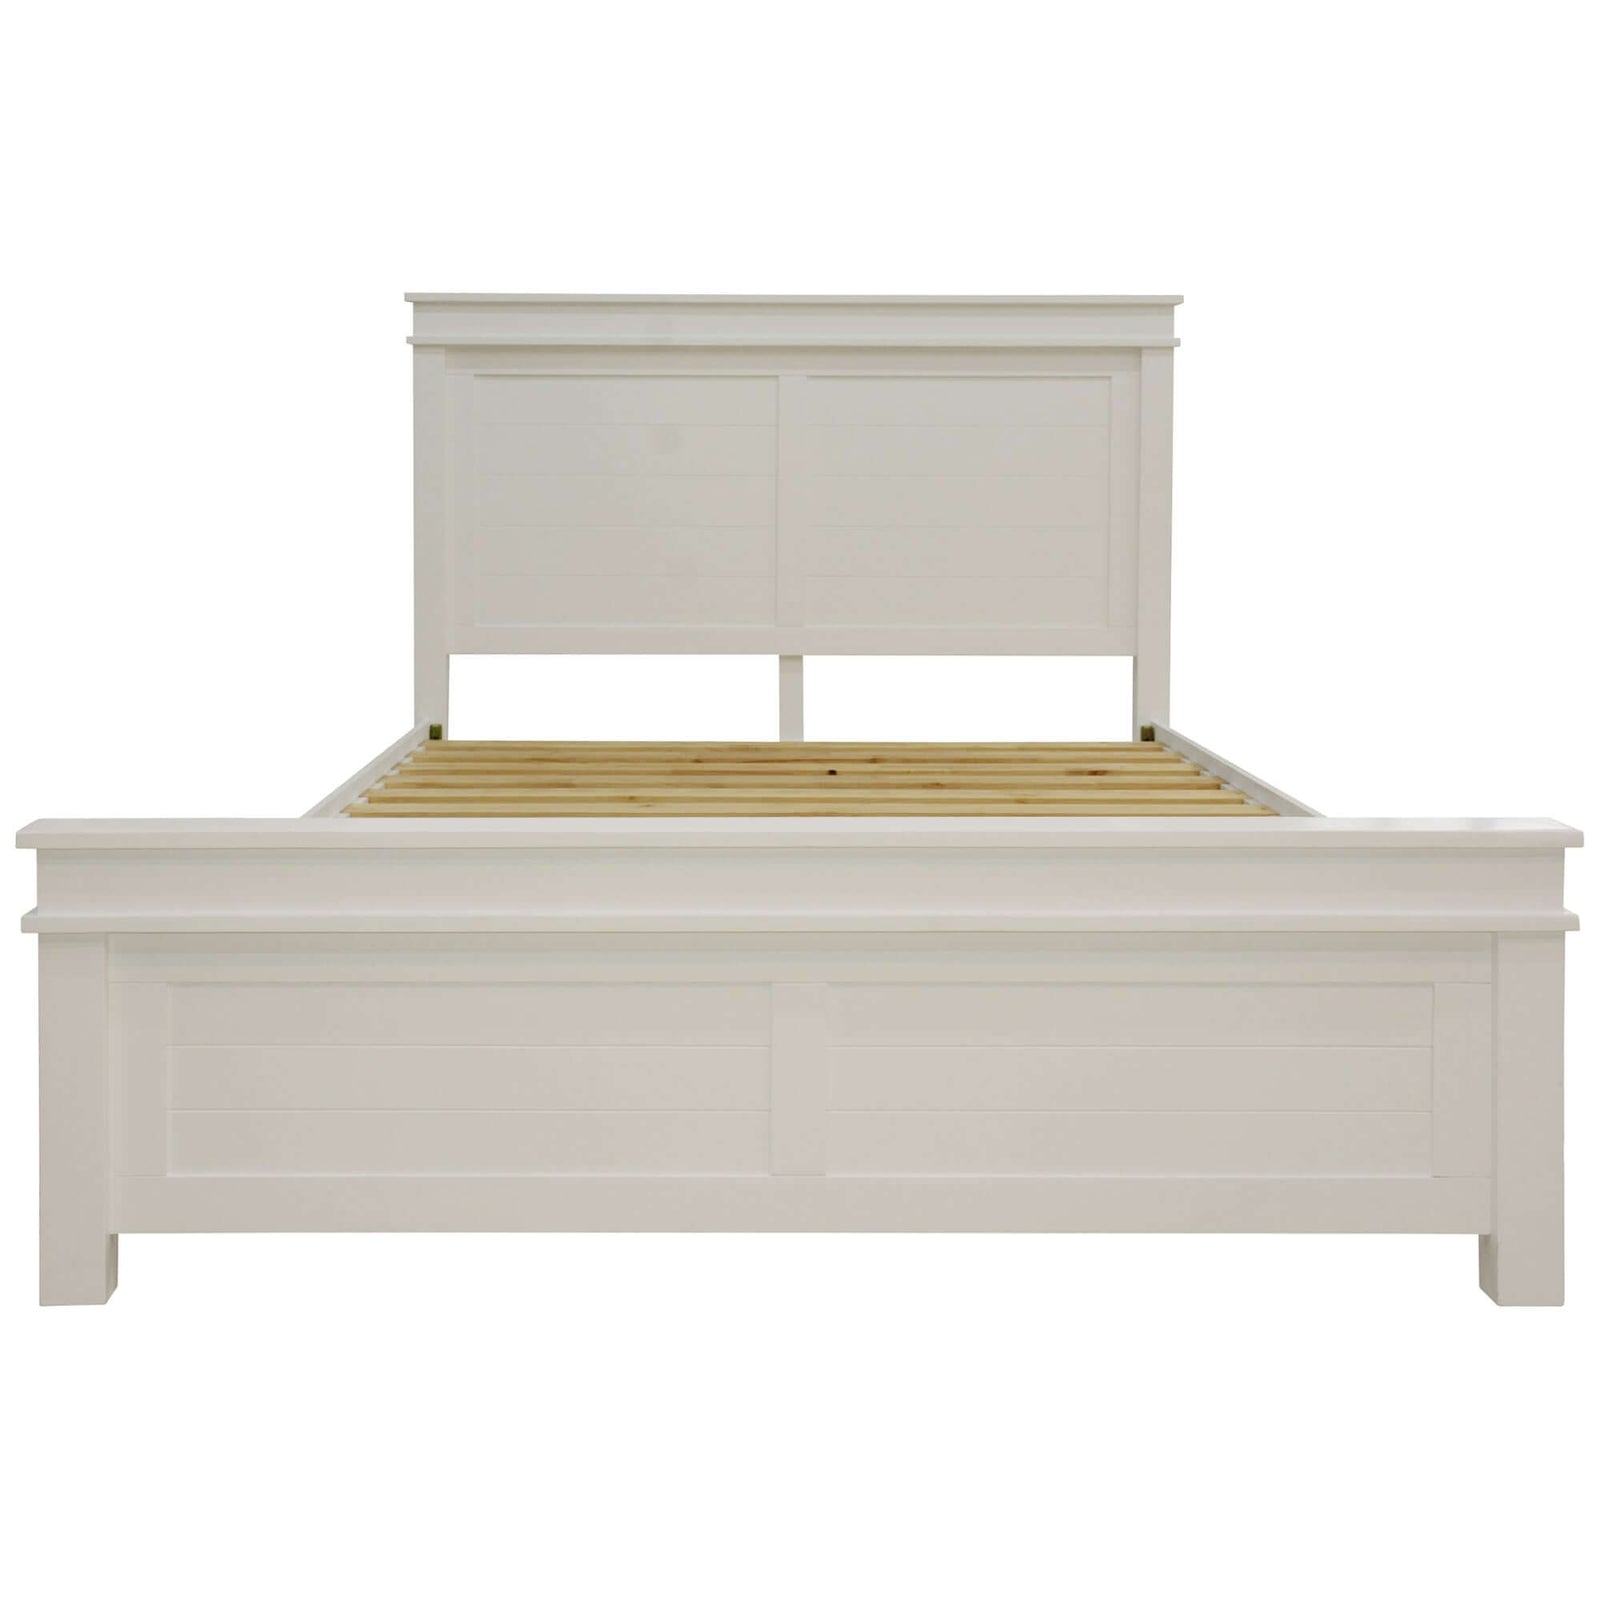 Lily Bed Frame King Size Timber Mattress Base With Storage Drawers - White-Upinteriors